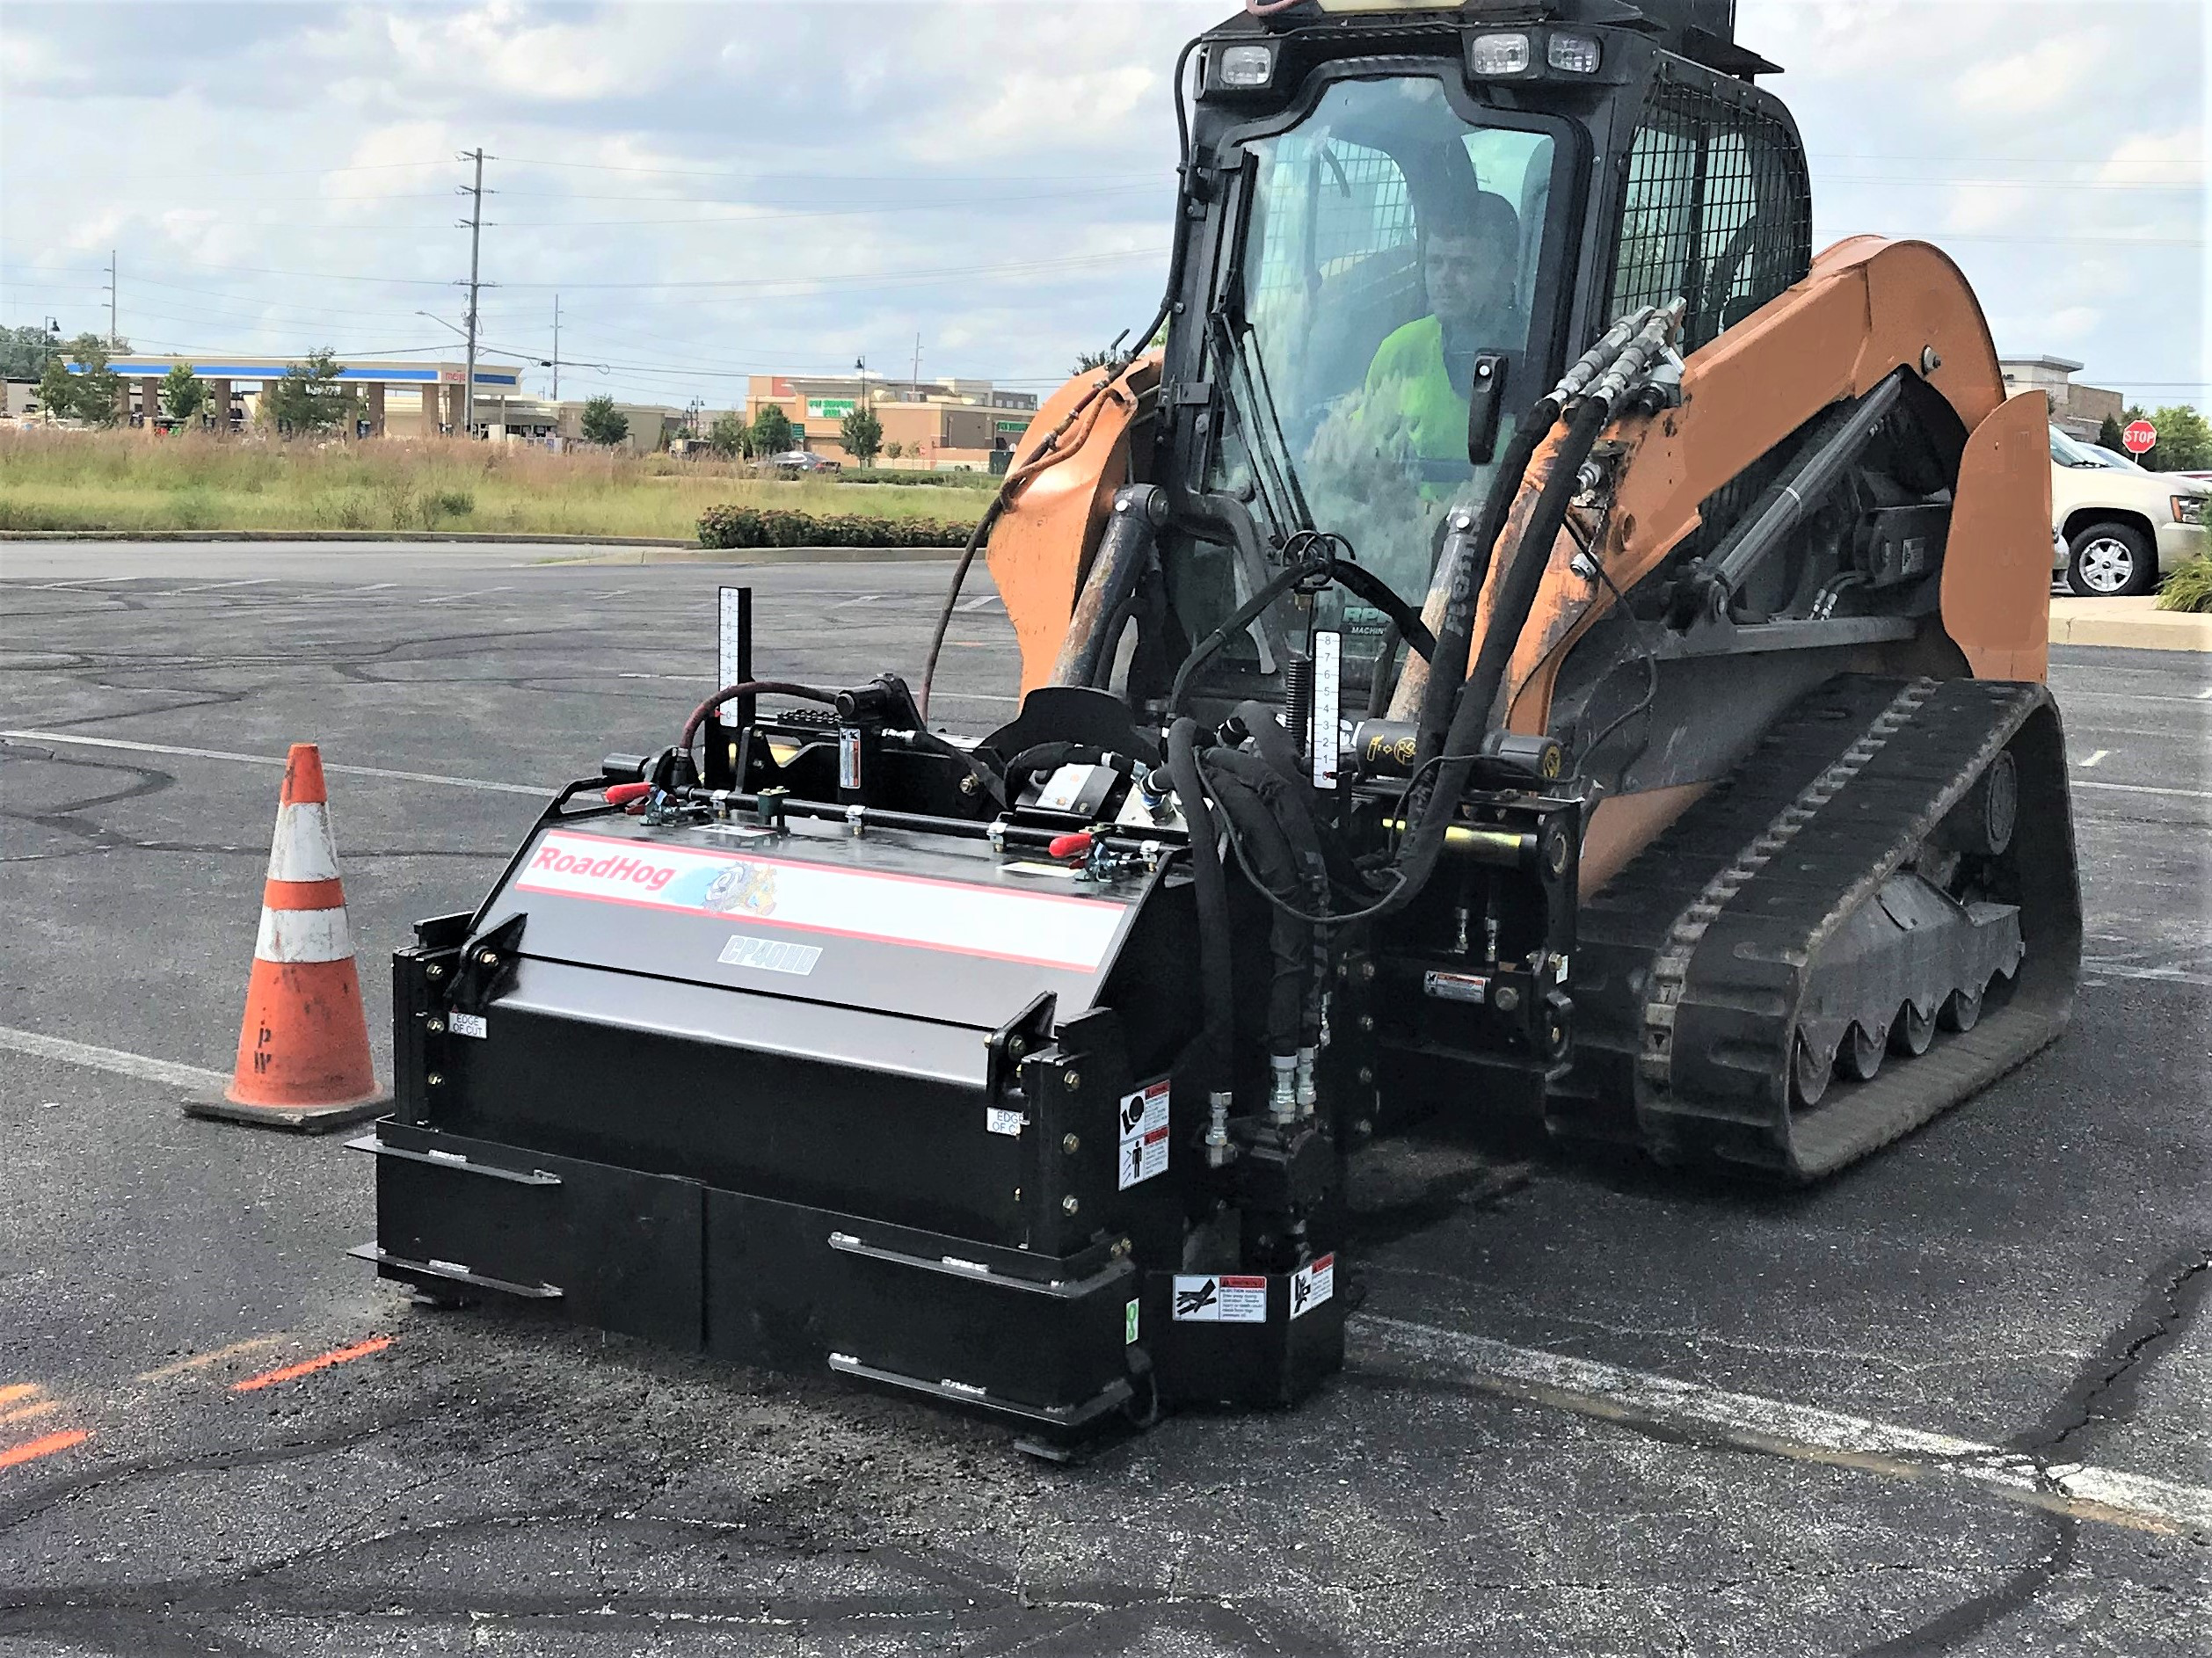 RoadHog's G5HD skid steer cold planer attached to a skid steer